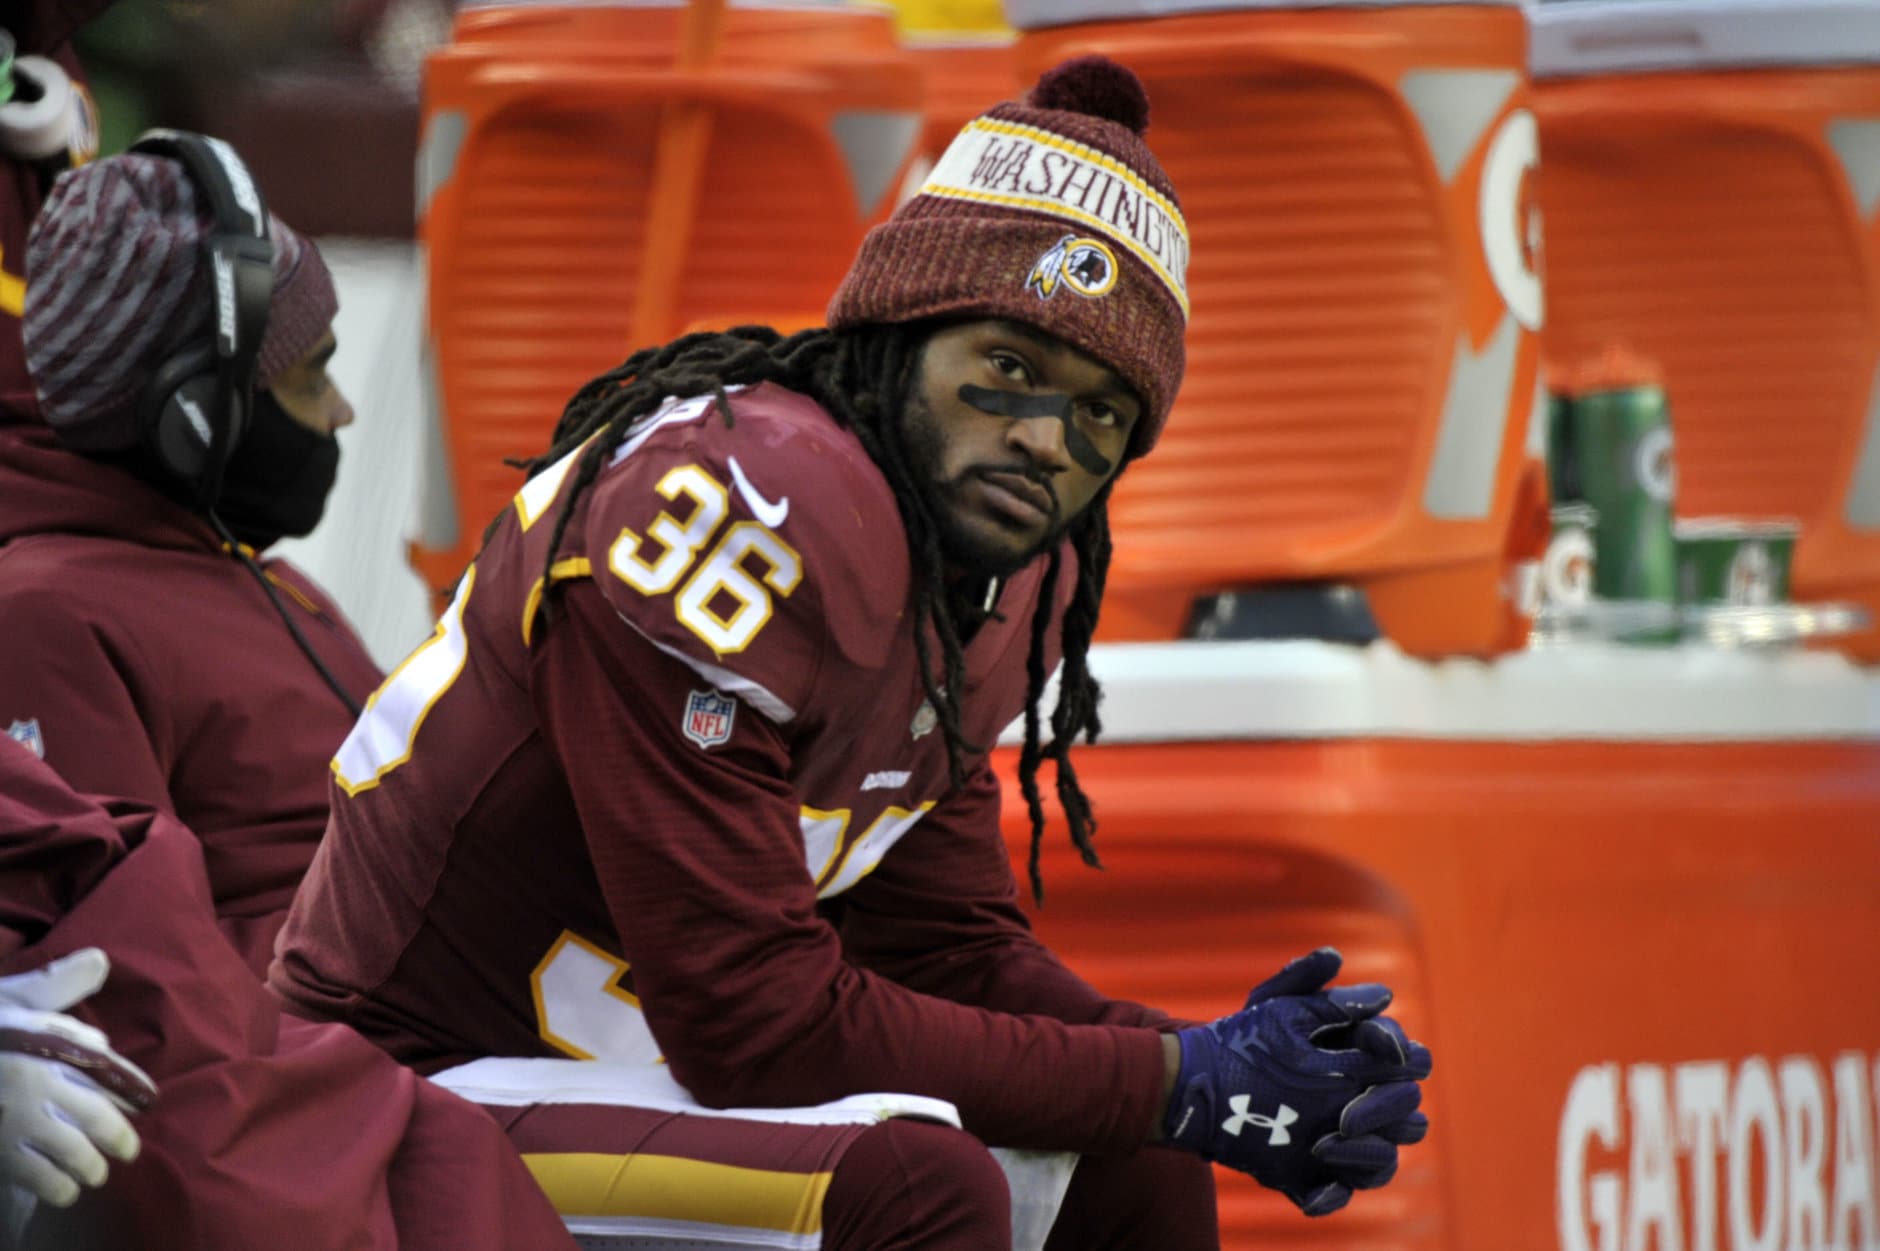 Washington Redskins free safety D.J. Swearinger sits on the bench in the fourth quarter of an NFL football game against the New York Giants, Sunday, Dec. 9, 2018, in Landover, Md. (AP Photo/Mark Tenally)